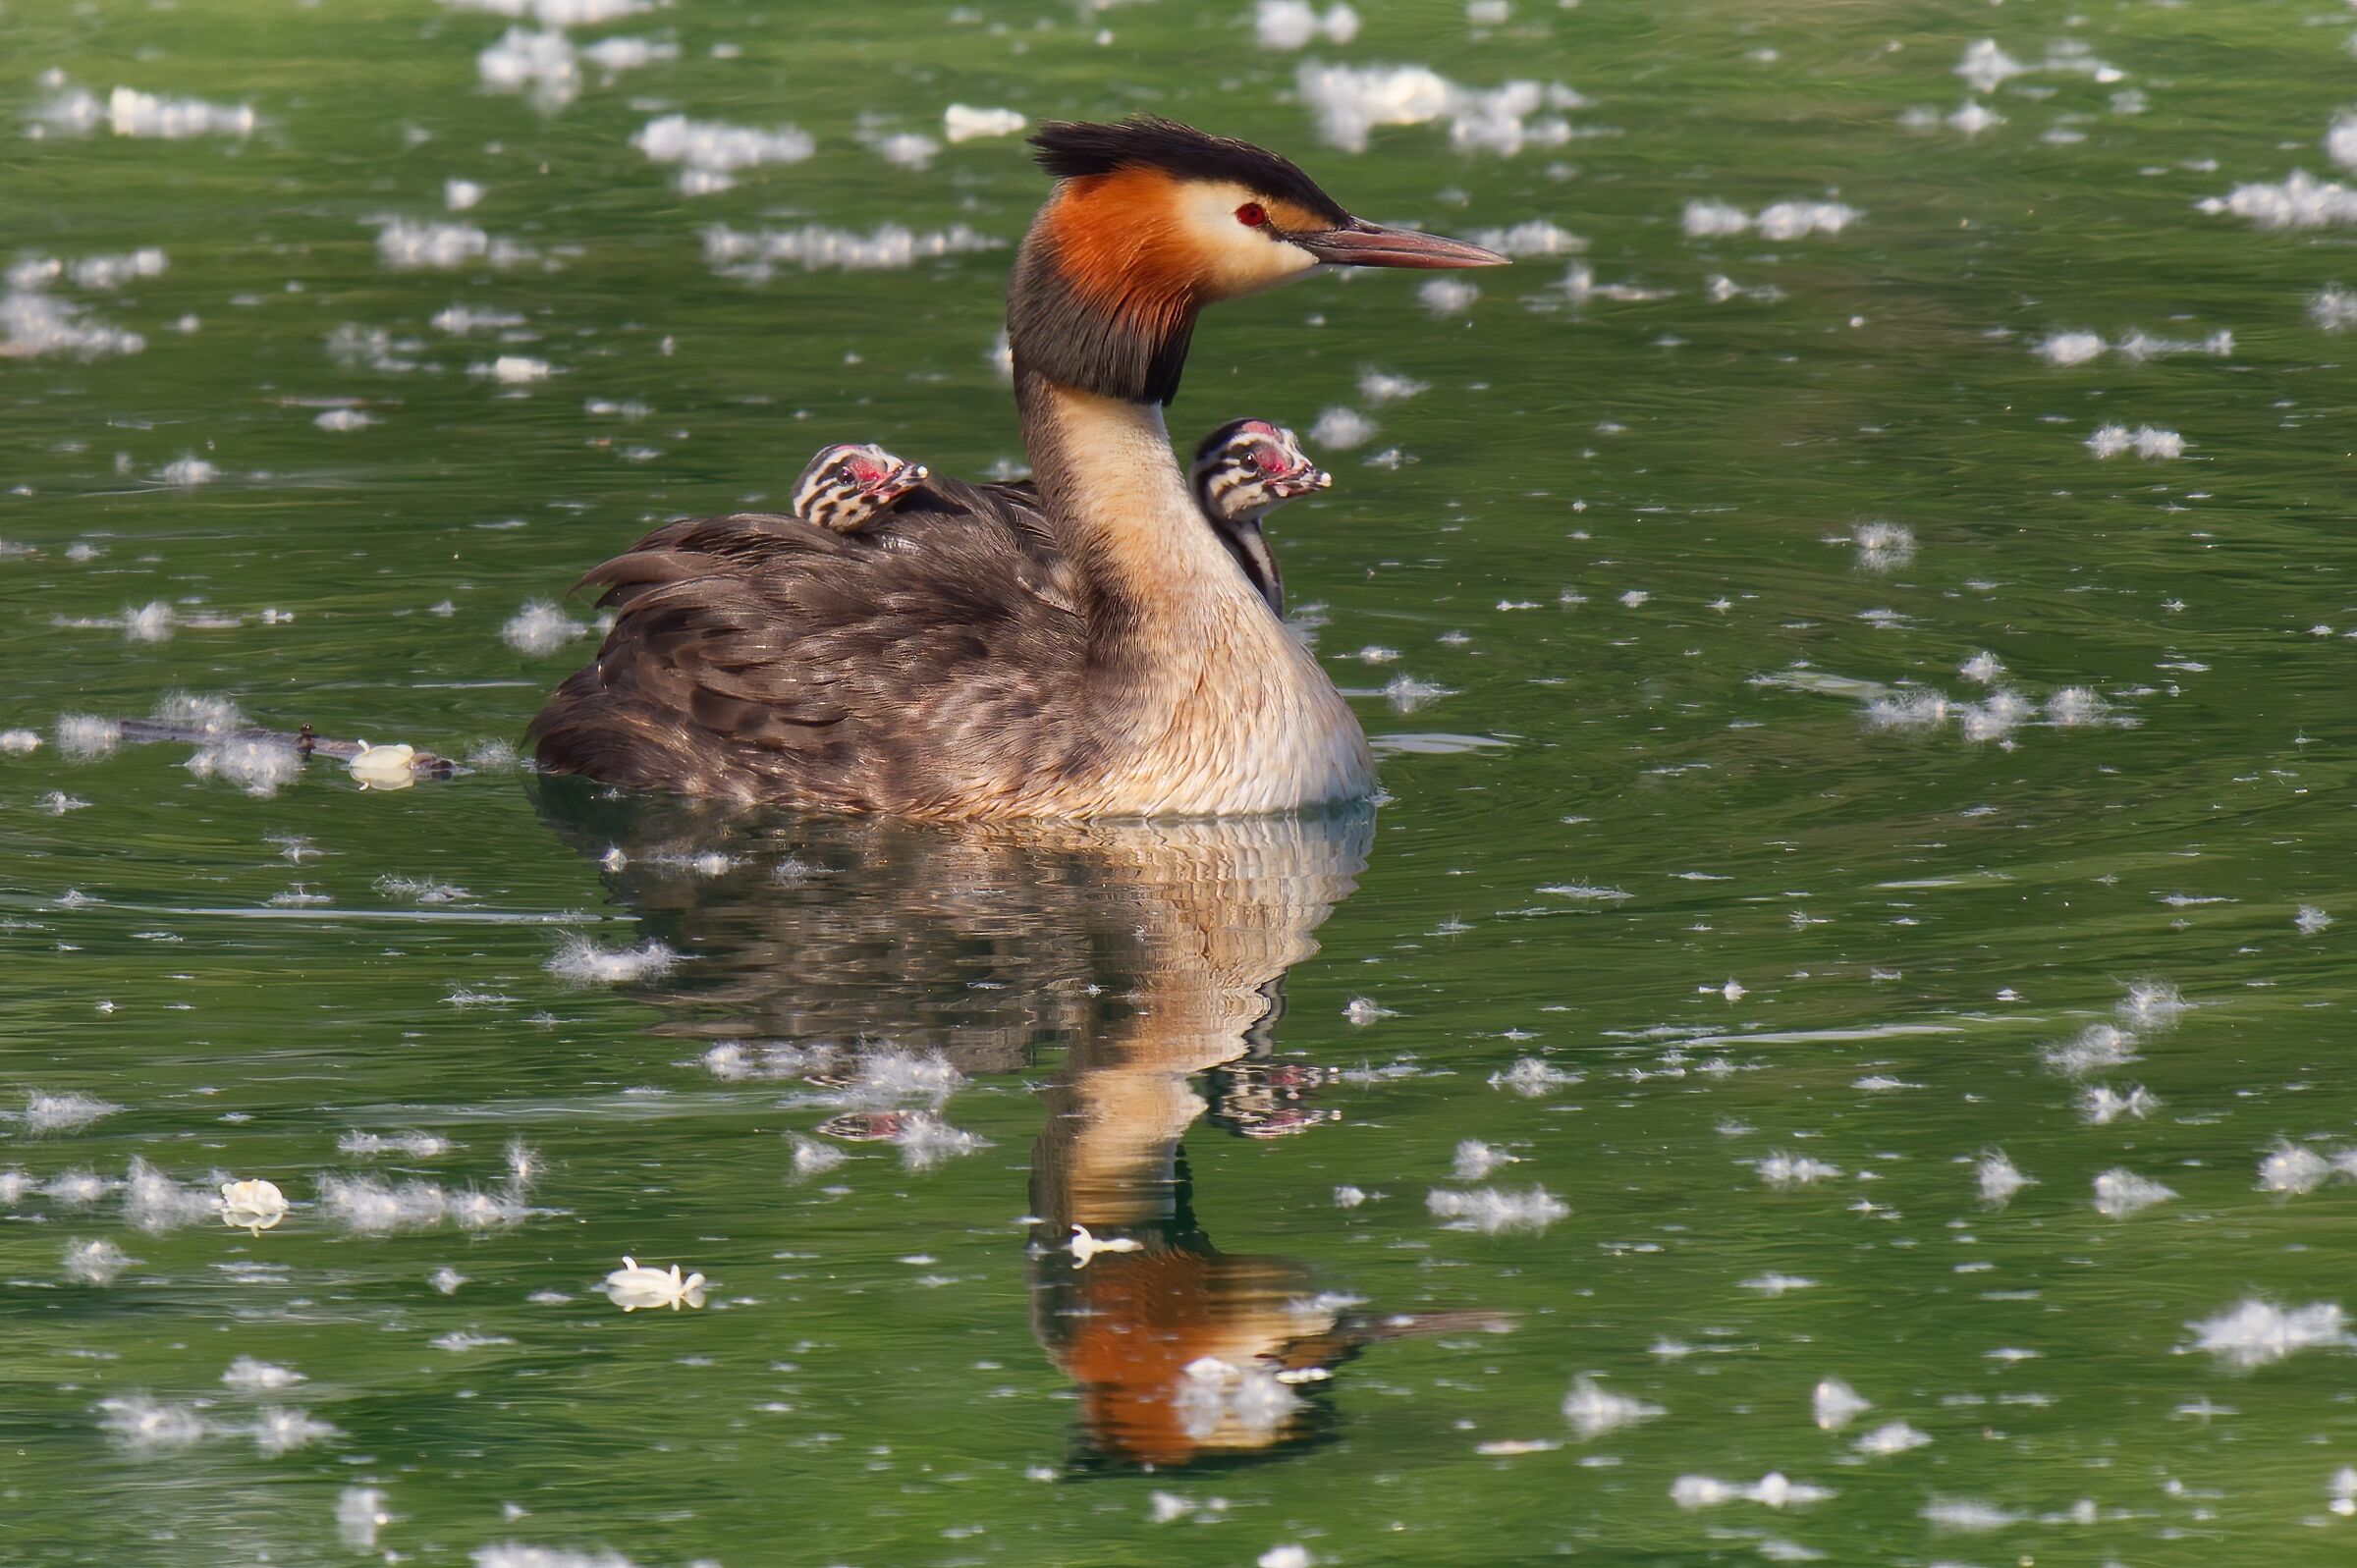 The Grebe with 3 heads ...